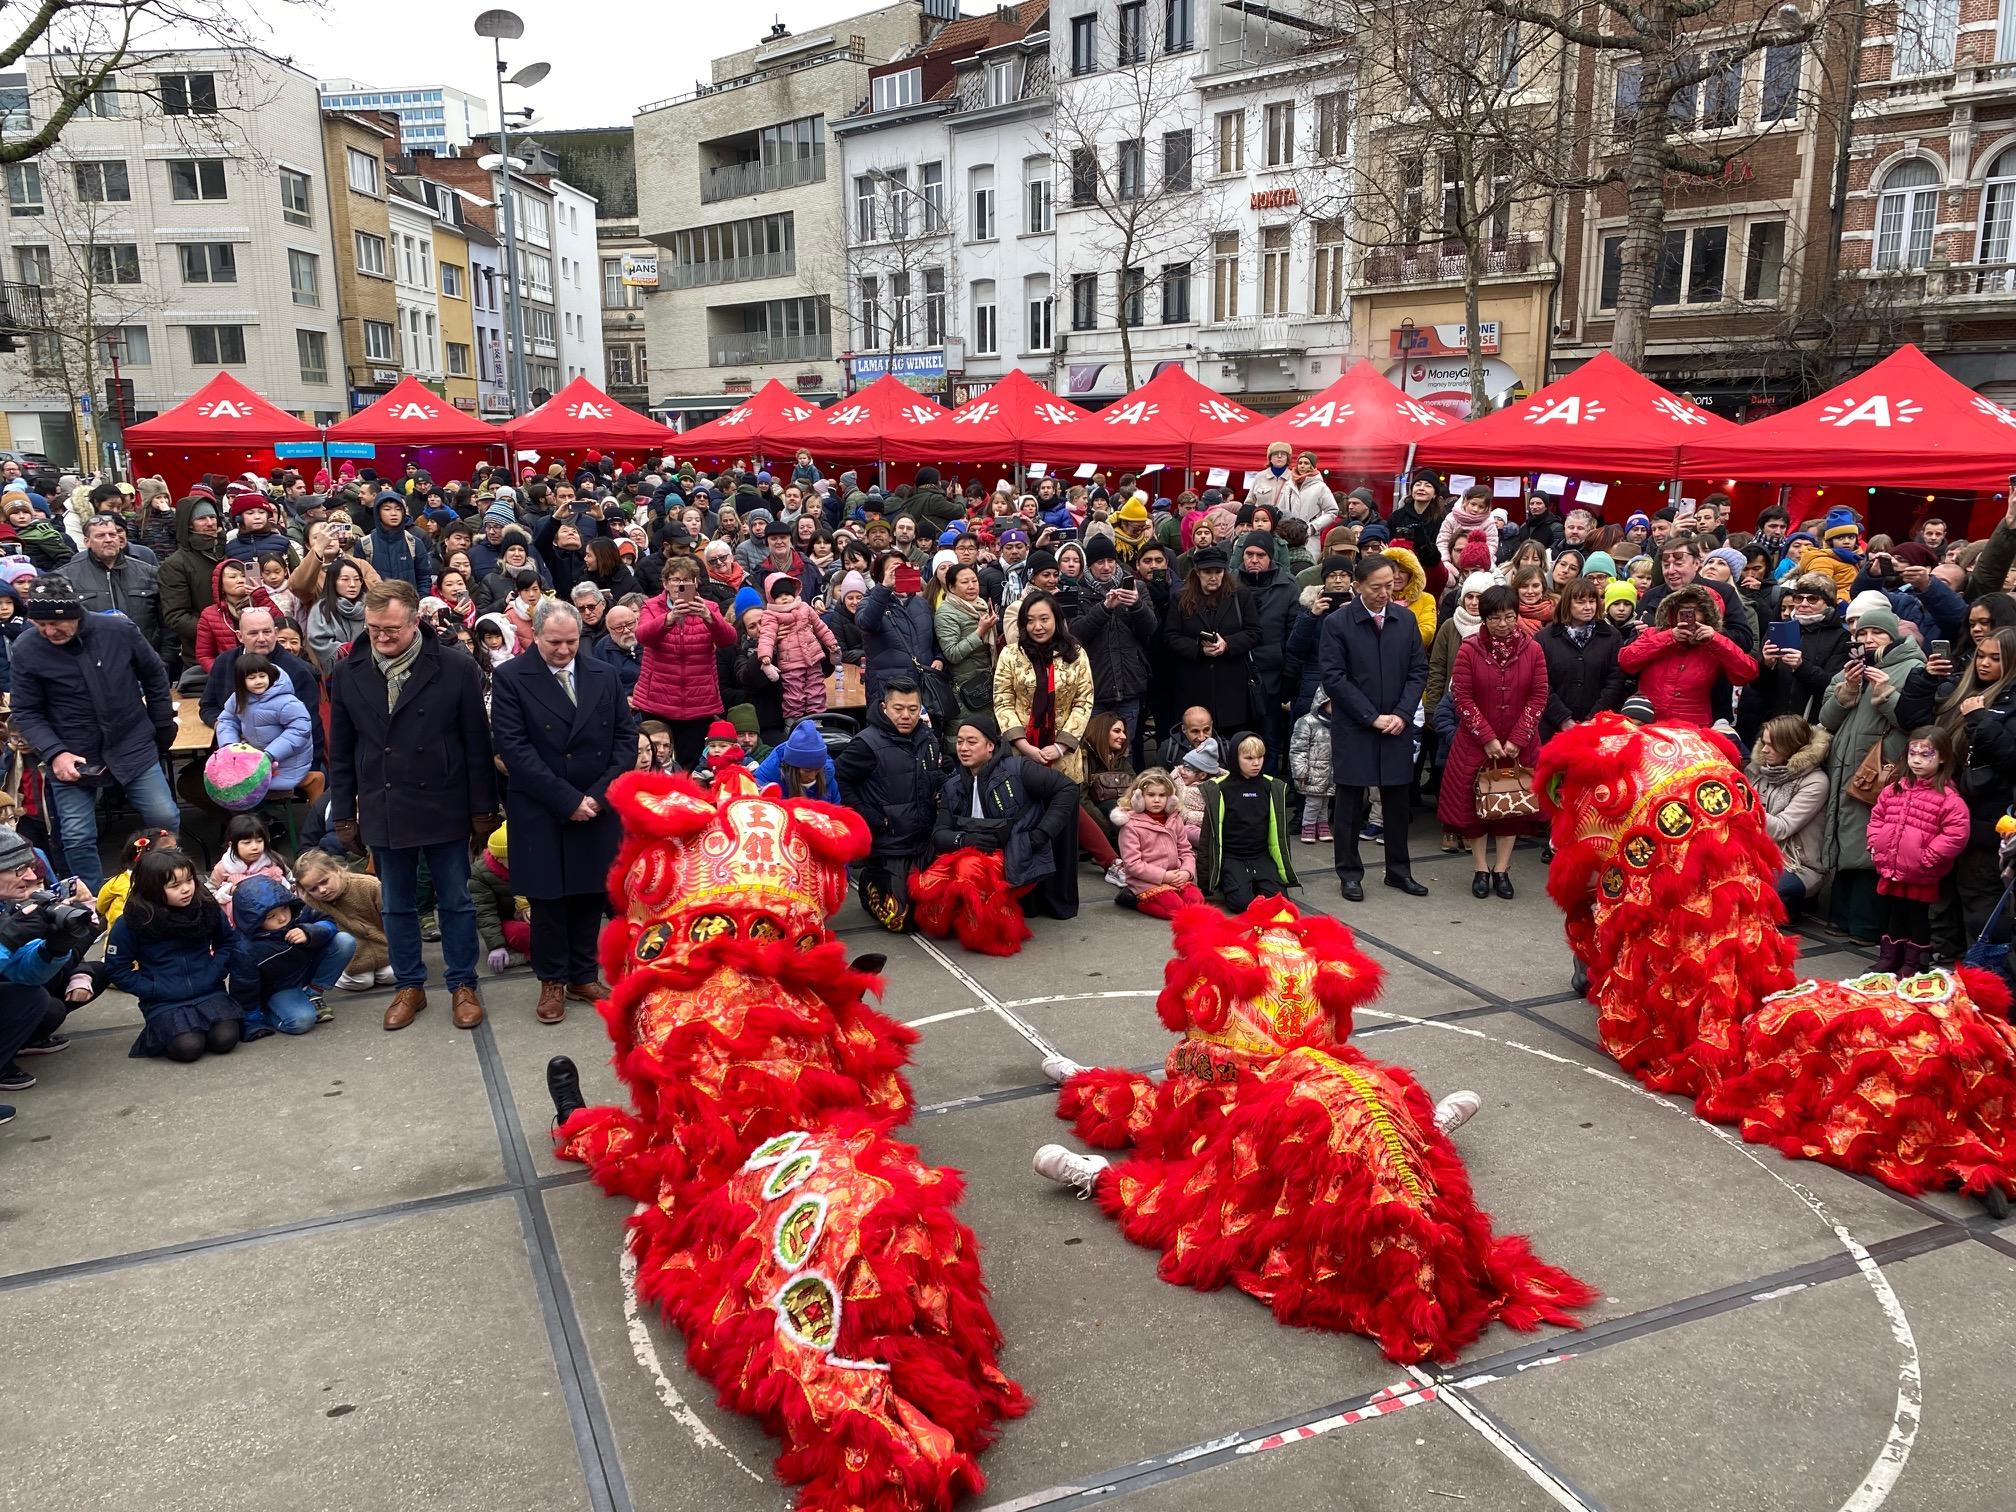 The Hong Kong Economic and Trade Office, Brussels is supporting the seventh edition of the "Legends of Lion Dance" held in the port city of Belgium, Antwerp, from January 13 to 29 (Antwerp time), showcasing Hong Kong's cultural heritage, crafts and Chinese New Year traditions. Photo shows the Lion Dance Parade delighting the crowds at the China Town of Antwerp on January 22 (Antwerp time) to celebrate the start of the Year of the Rabbit.